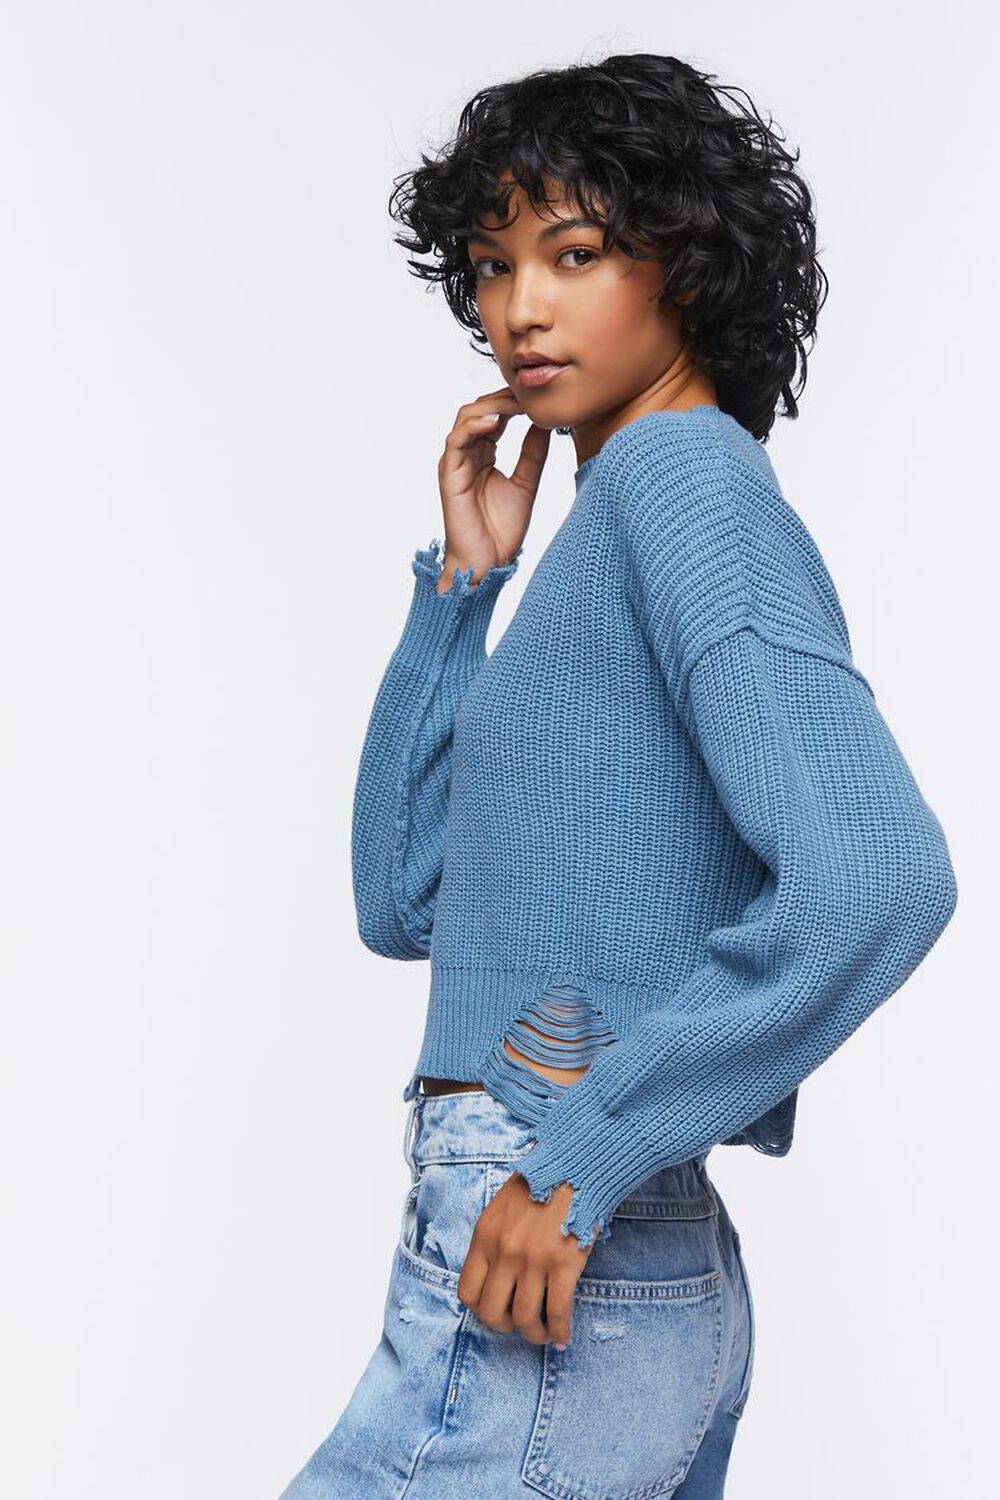 COLONY BLUE Distressed Drop-Sleeve Sweater, image 3